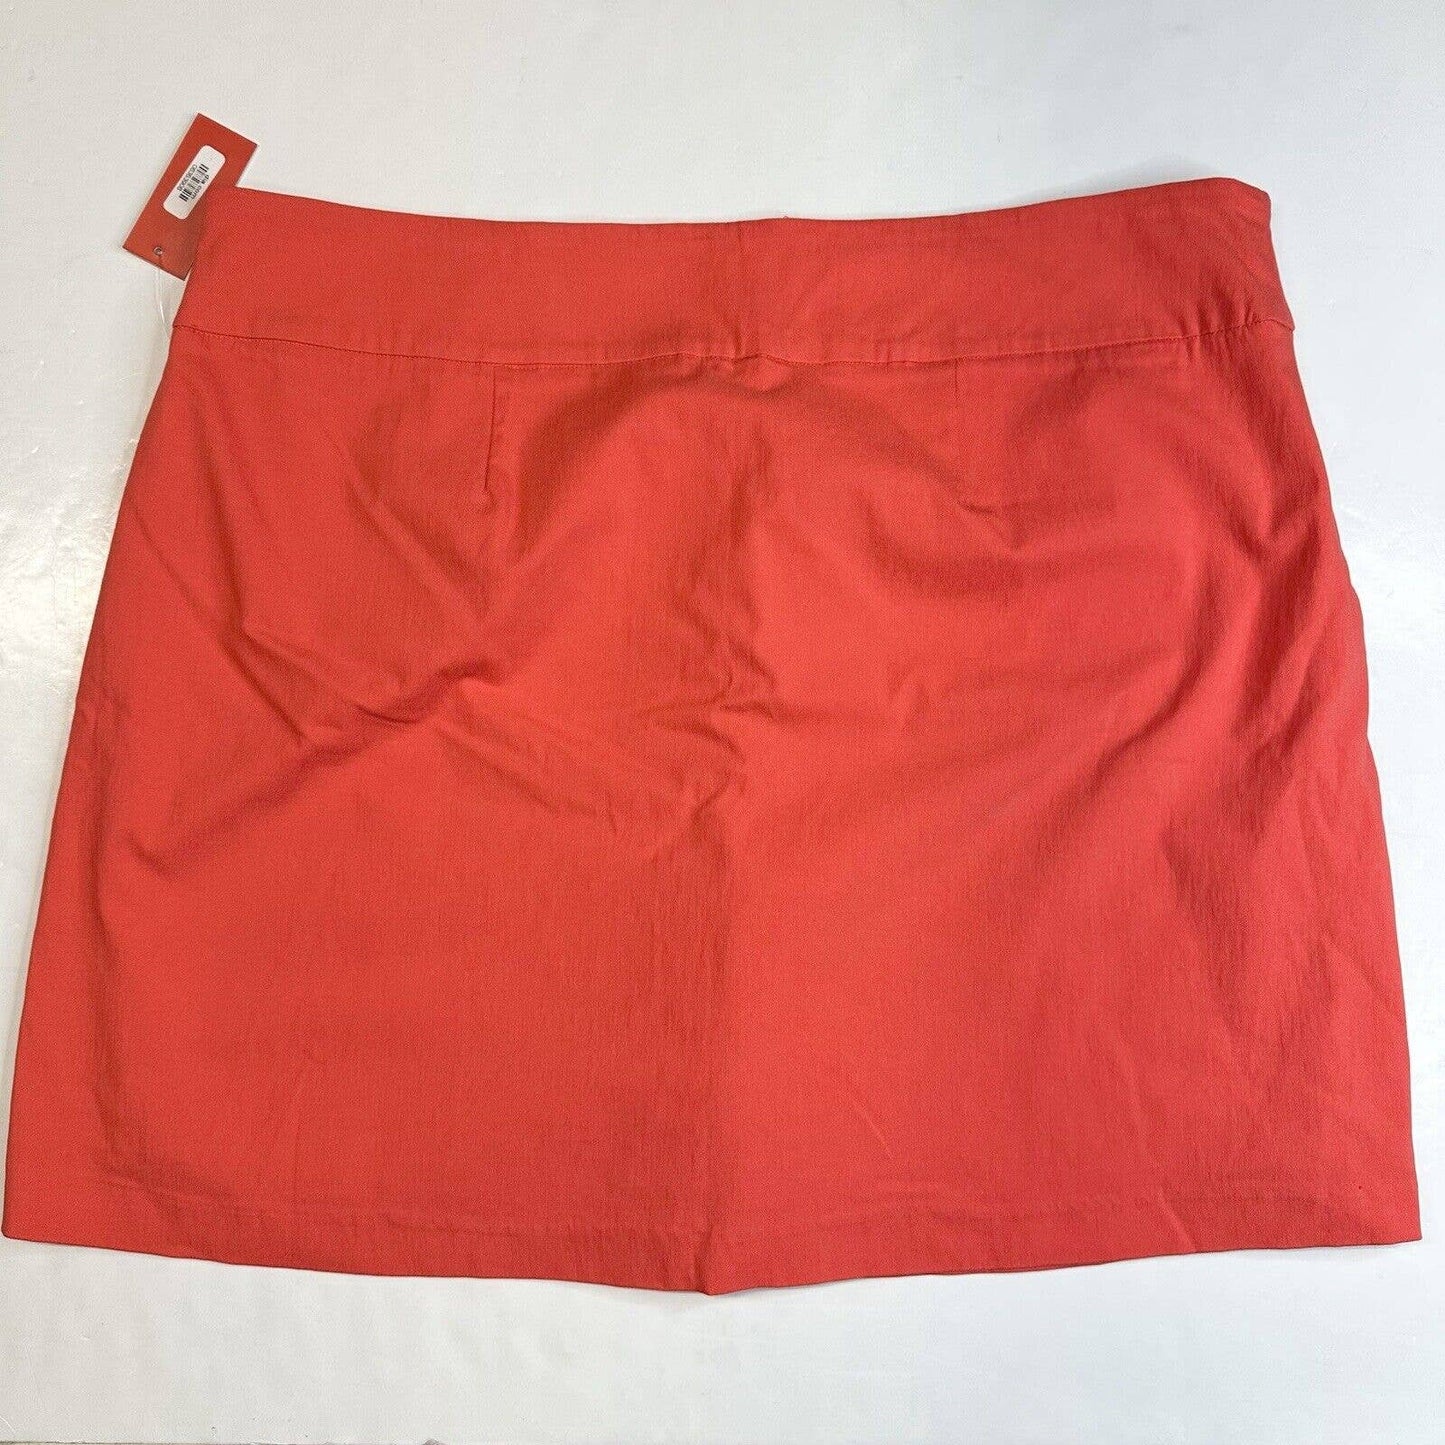 Molly & Isadora Pull On Skort Womens 18W Neon Red Active Skirt/Shorts NWT *Mark